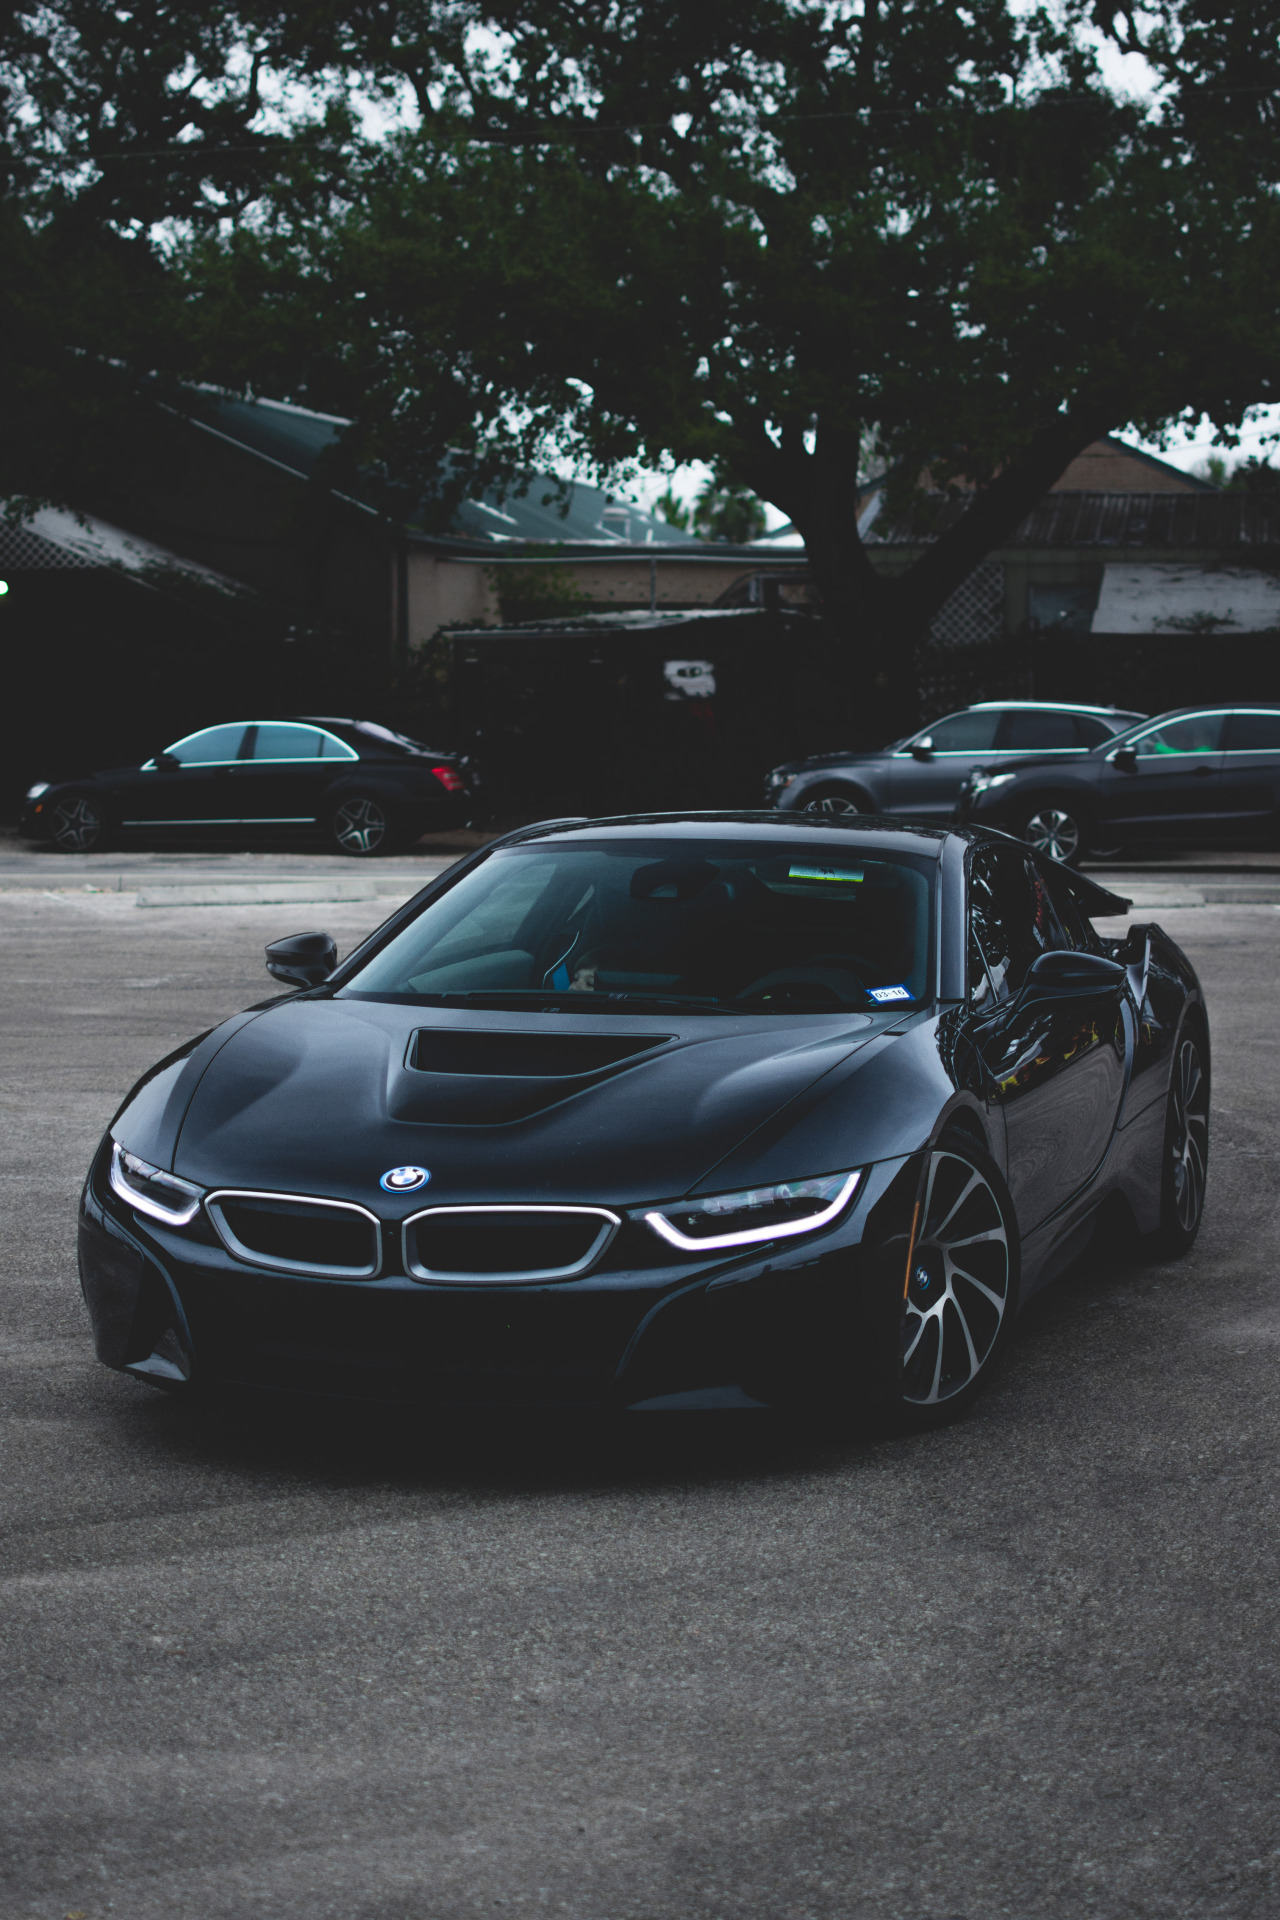 bmw hd wallpapers for mobile,land vehicle,vehicle,car,automotive design,luxury vehicle